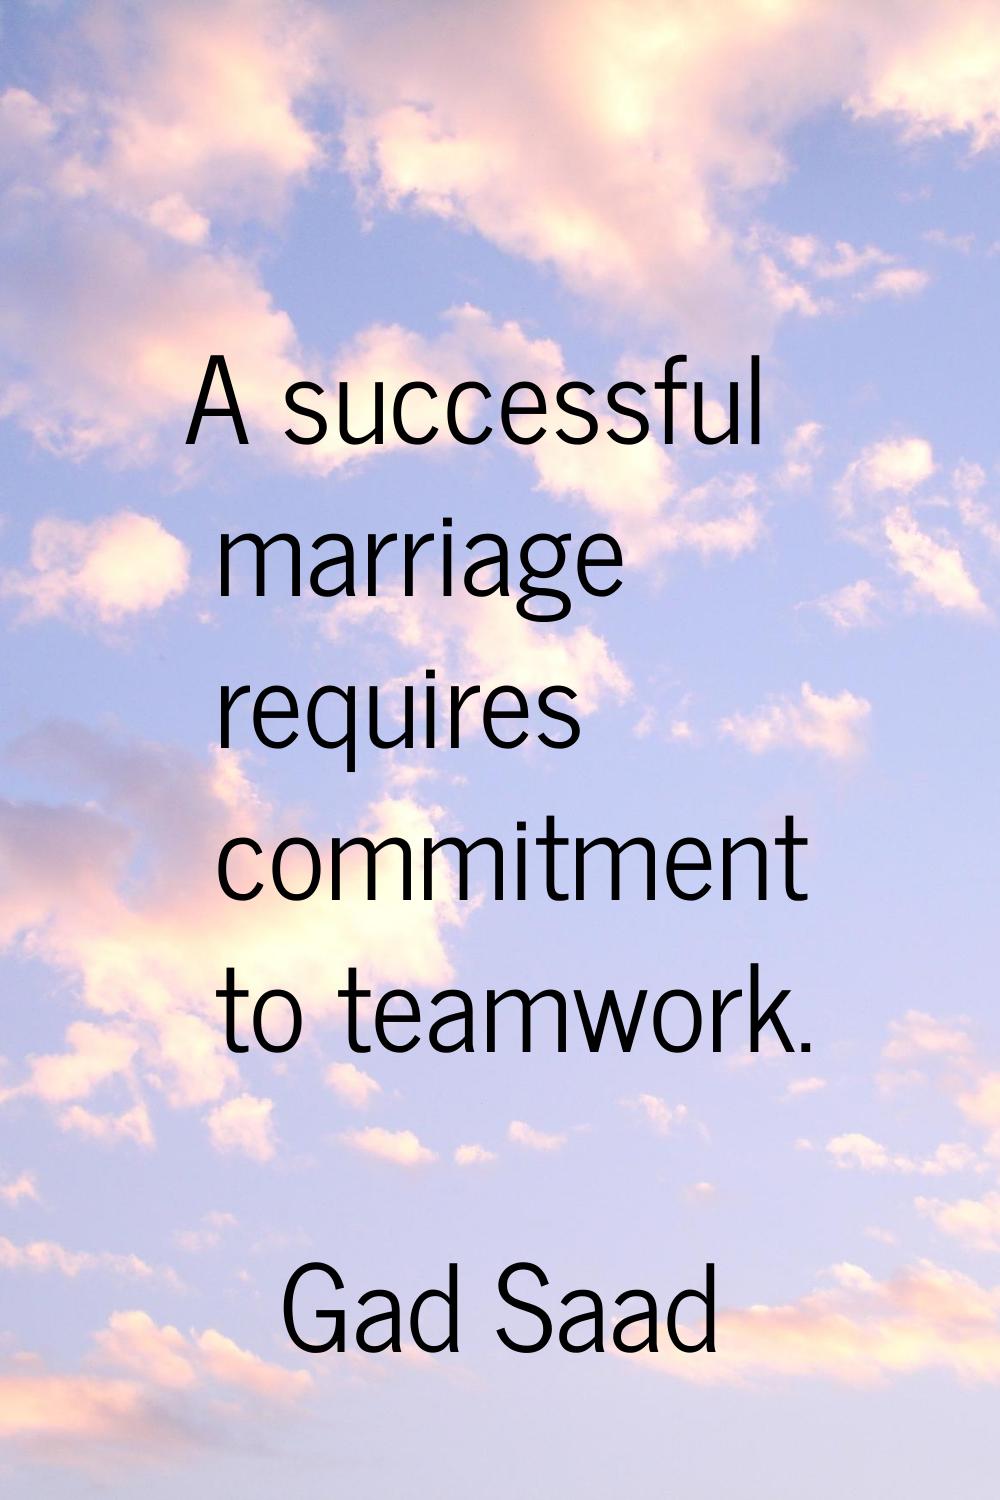 A successful marriage requires commitment to teamwork.